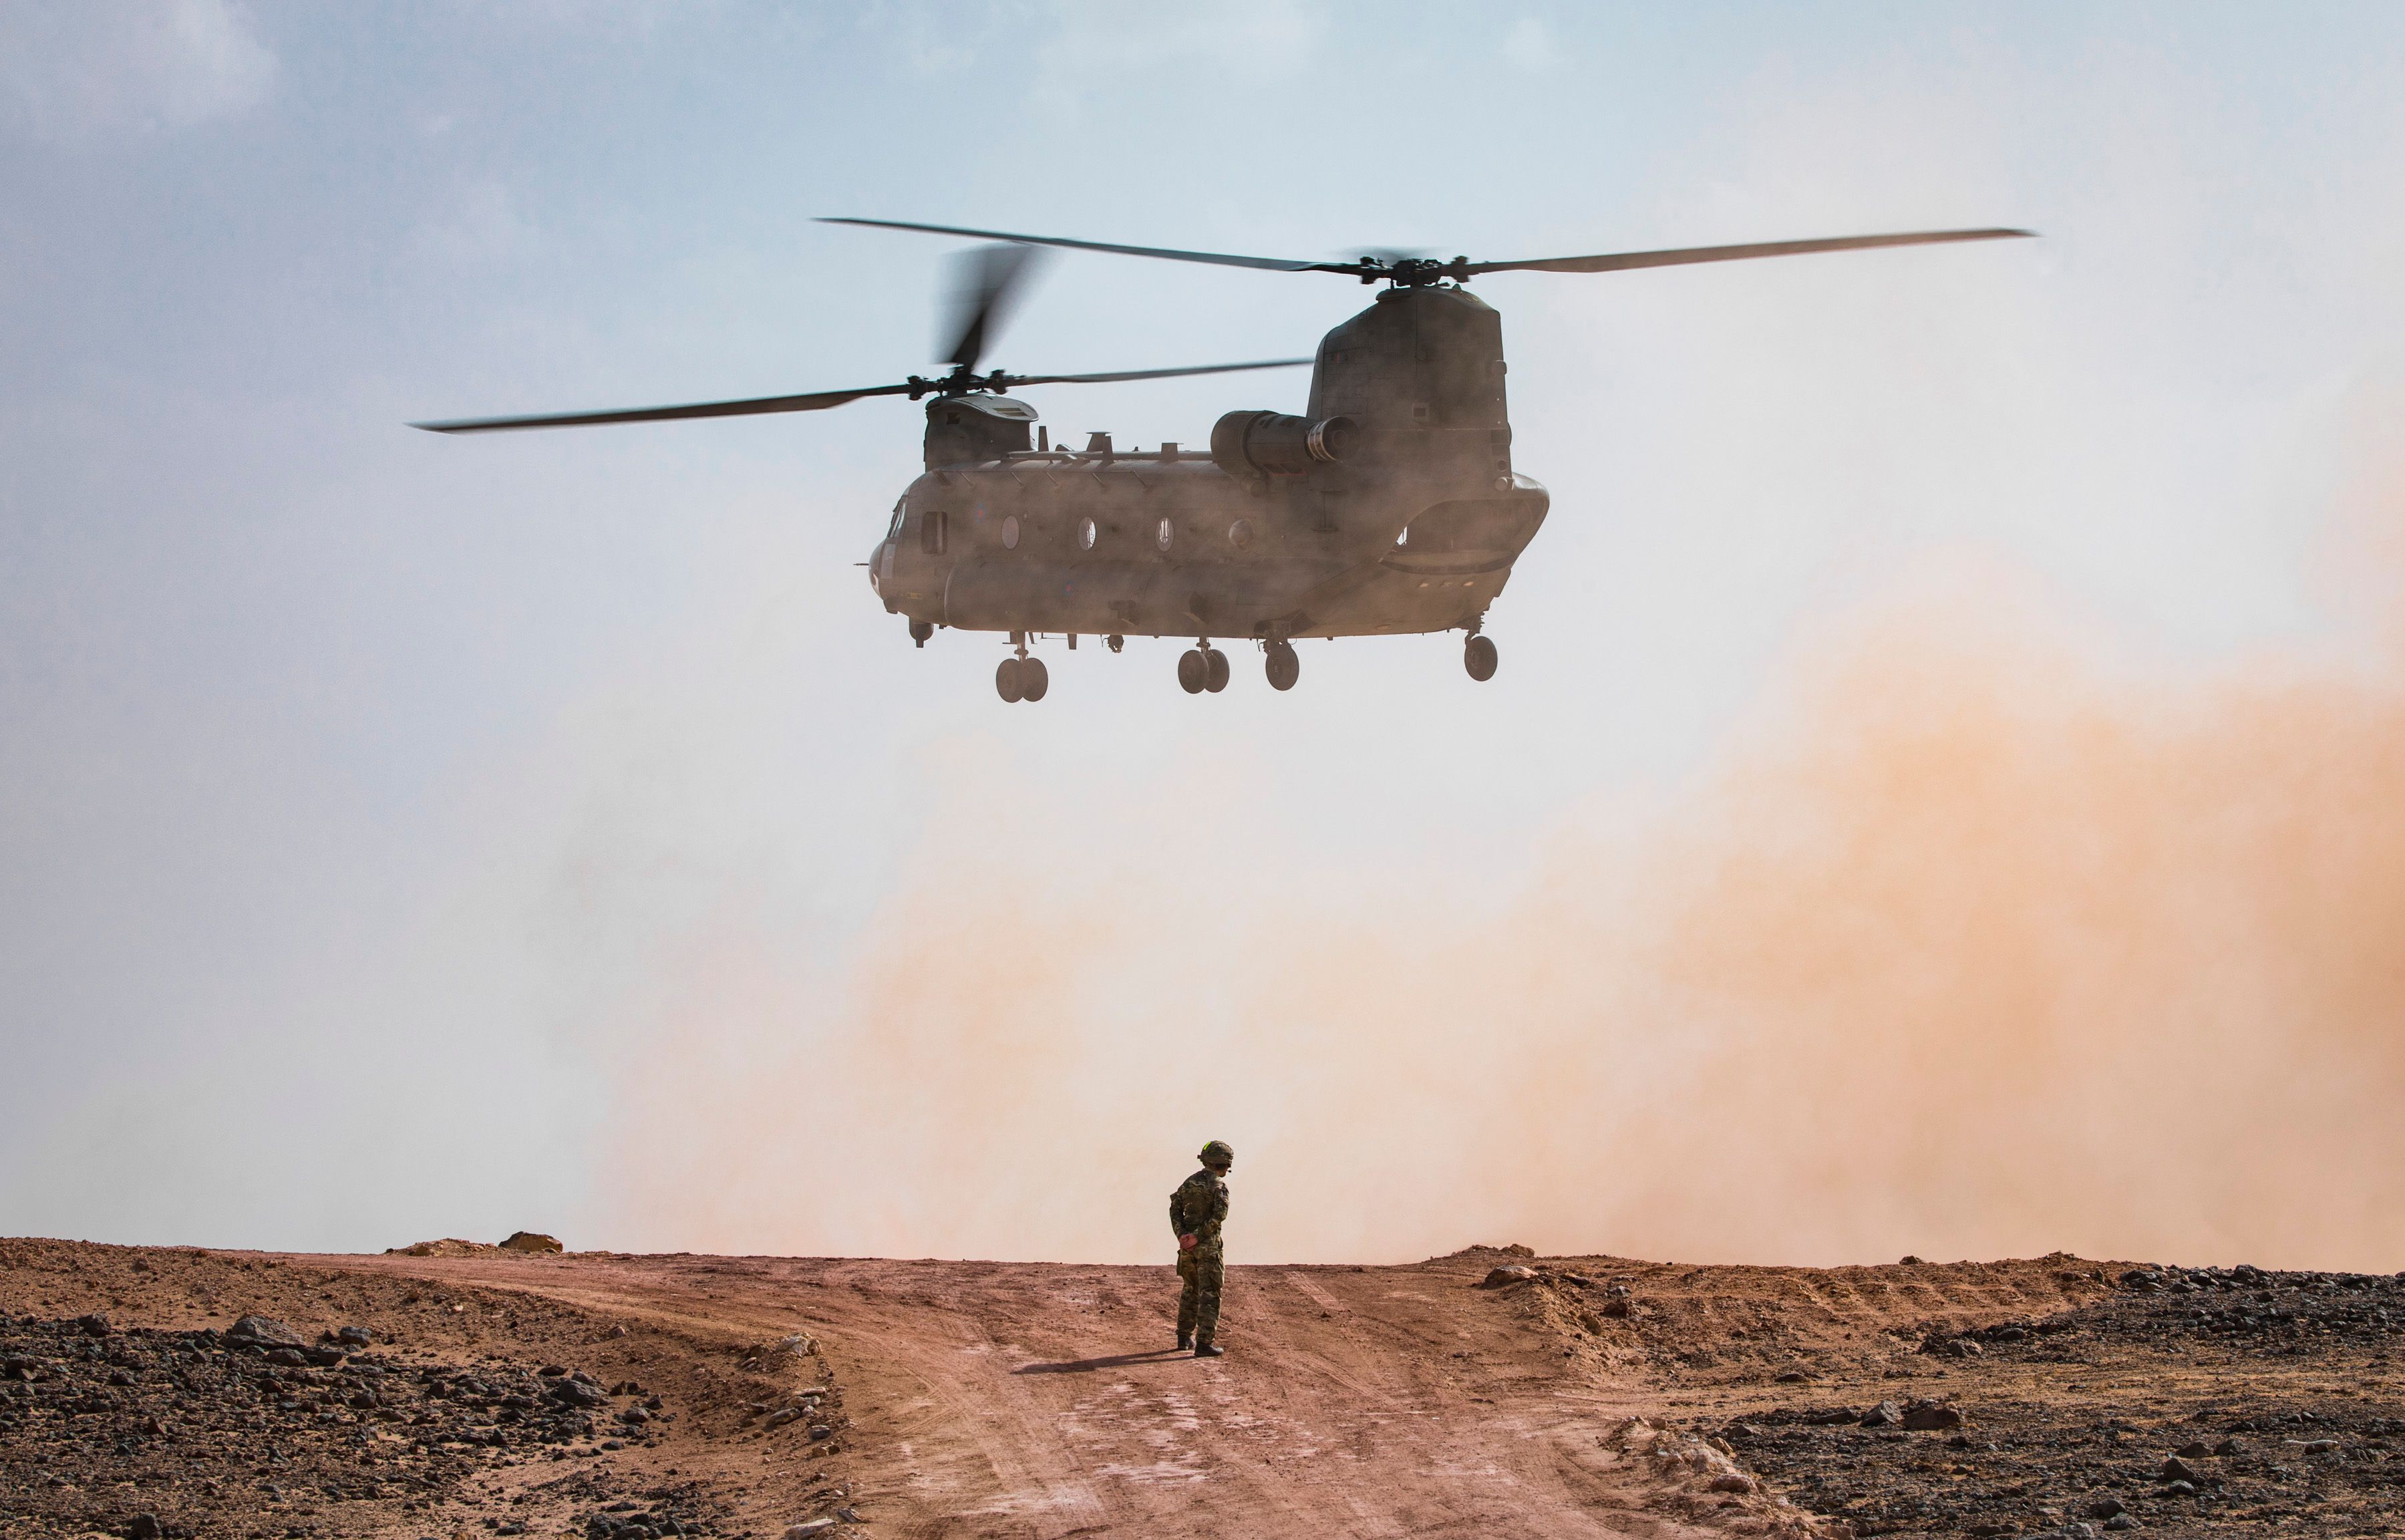 Pictured: A No. 27 Squadron RAF Chinook helicopter lands at the Fire Power Demonstration Area in order to collect the VVIPs and VIPs. British and Omani Militaries combined forces over the last few weeks on Exercise Saif Sareea 3, culminating in an awesome fire power demonstration lasting more than 30 minutes at two separate locations in Oman. On 3 Nov 18 a Fire Power Demonstration brought weeks of hard work together in a series of simulated attacks on targets. Streamed live to a VIP area in an inland location, an amphibious assault by Royal Marines and Omani troops onto a beach location in Eastern Oman with fast-roping from RAF Chinook helicopters of 27 Squadron, combined with Naval gunfire support formed the first element of the demonstration. The second phase, viewed by Omani Officers and Officials, Gavin Williamson the UK Secretary of State for Defence, and the Chiefs of UK Defence Forces, started after Omani Air Defences shot down a 'rogue' drone aircraft. This was followed closely by various attacks from the air and ground. This included airstrikes by RAF Typhoons, Omani F-16s, Omani Super Lynx and Army Air Corps Apache helicopters before Javelin anti-tank weapon firing destroyed more targets.